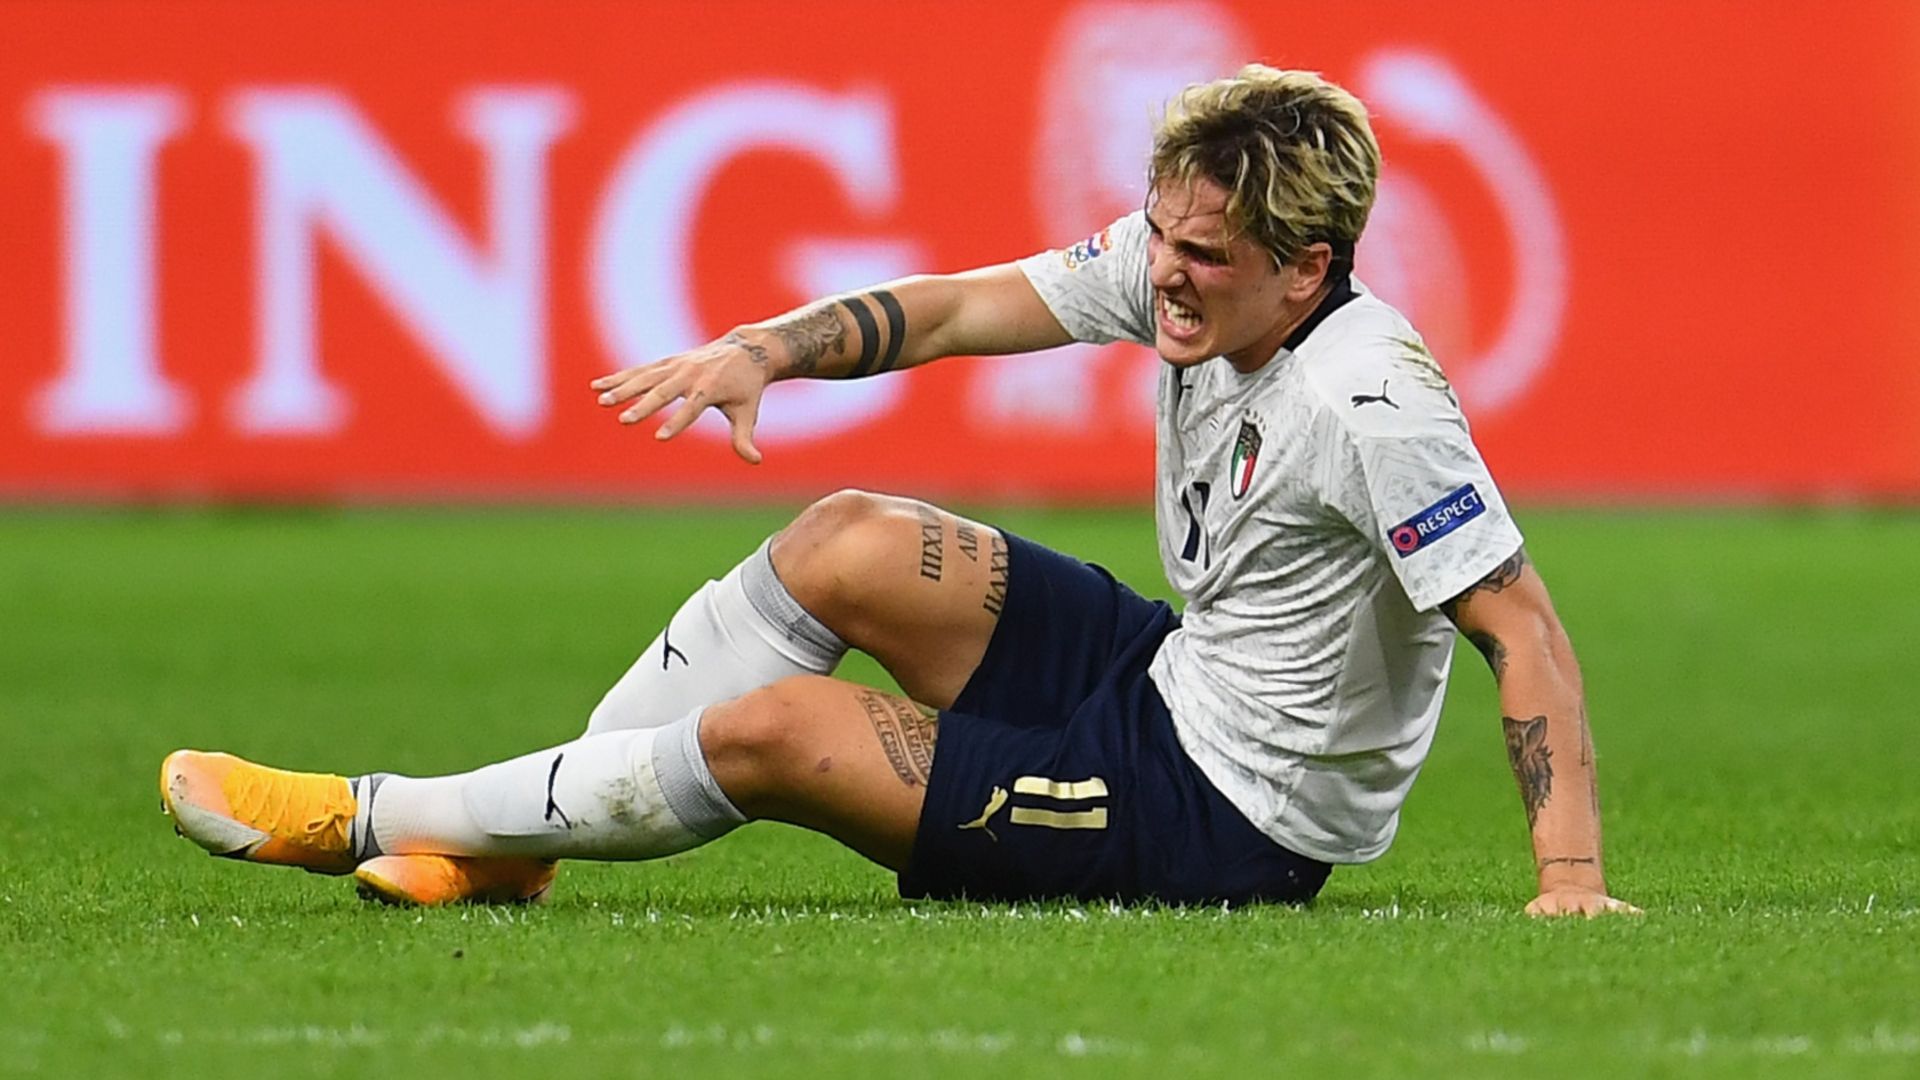 Nicoló Zaniolo surrered an ACL injury during the match between Italy and the Netherlands